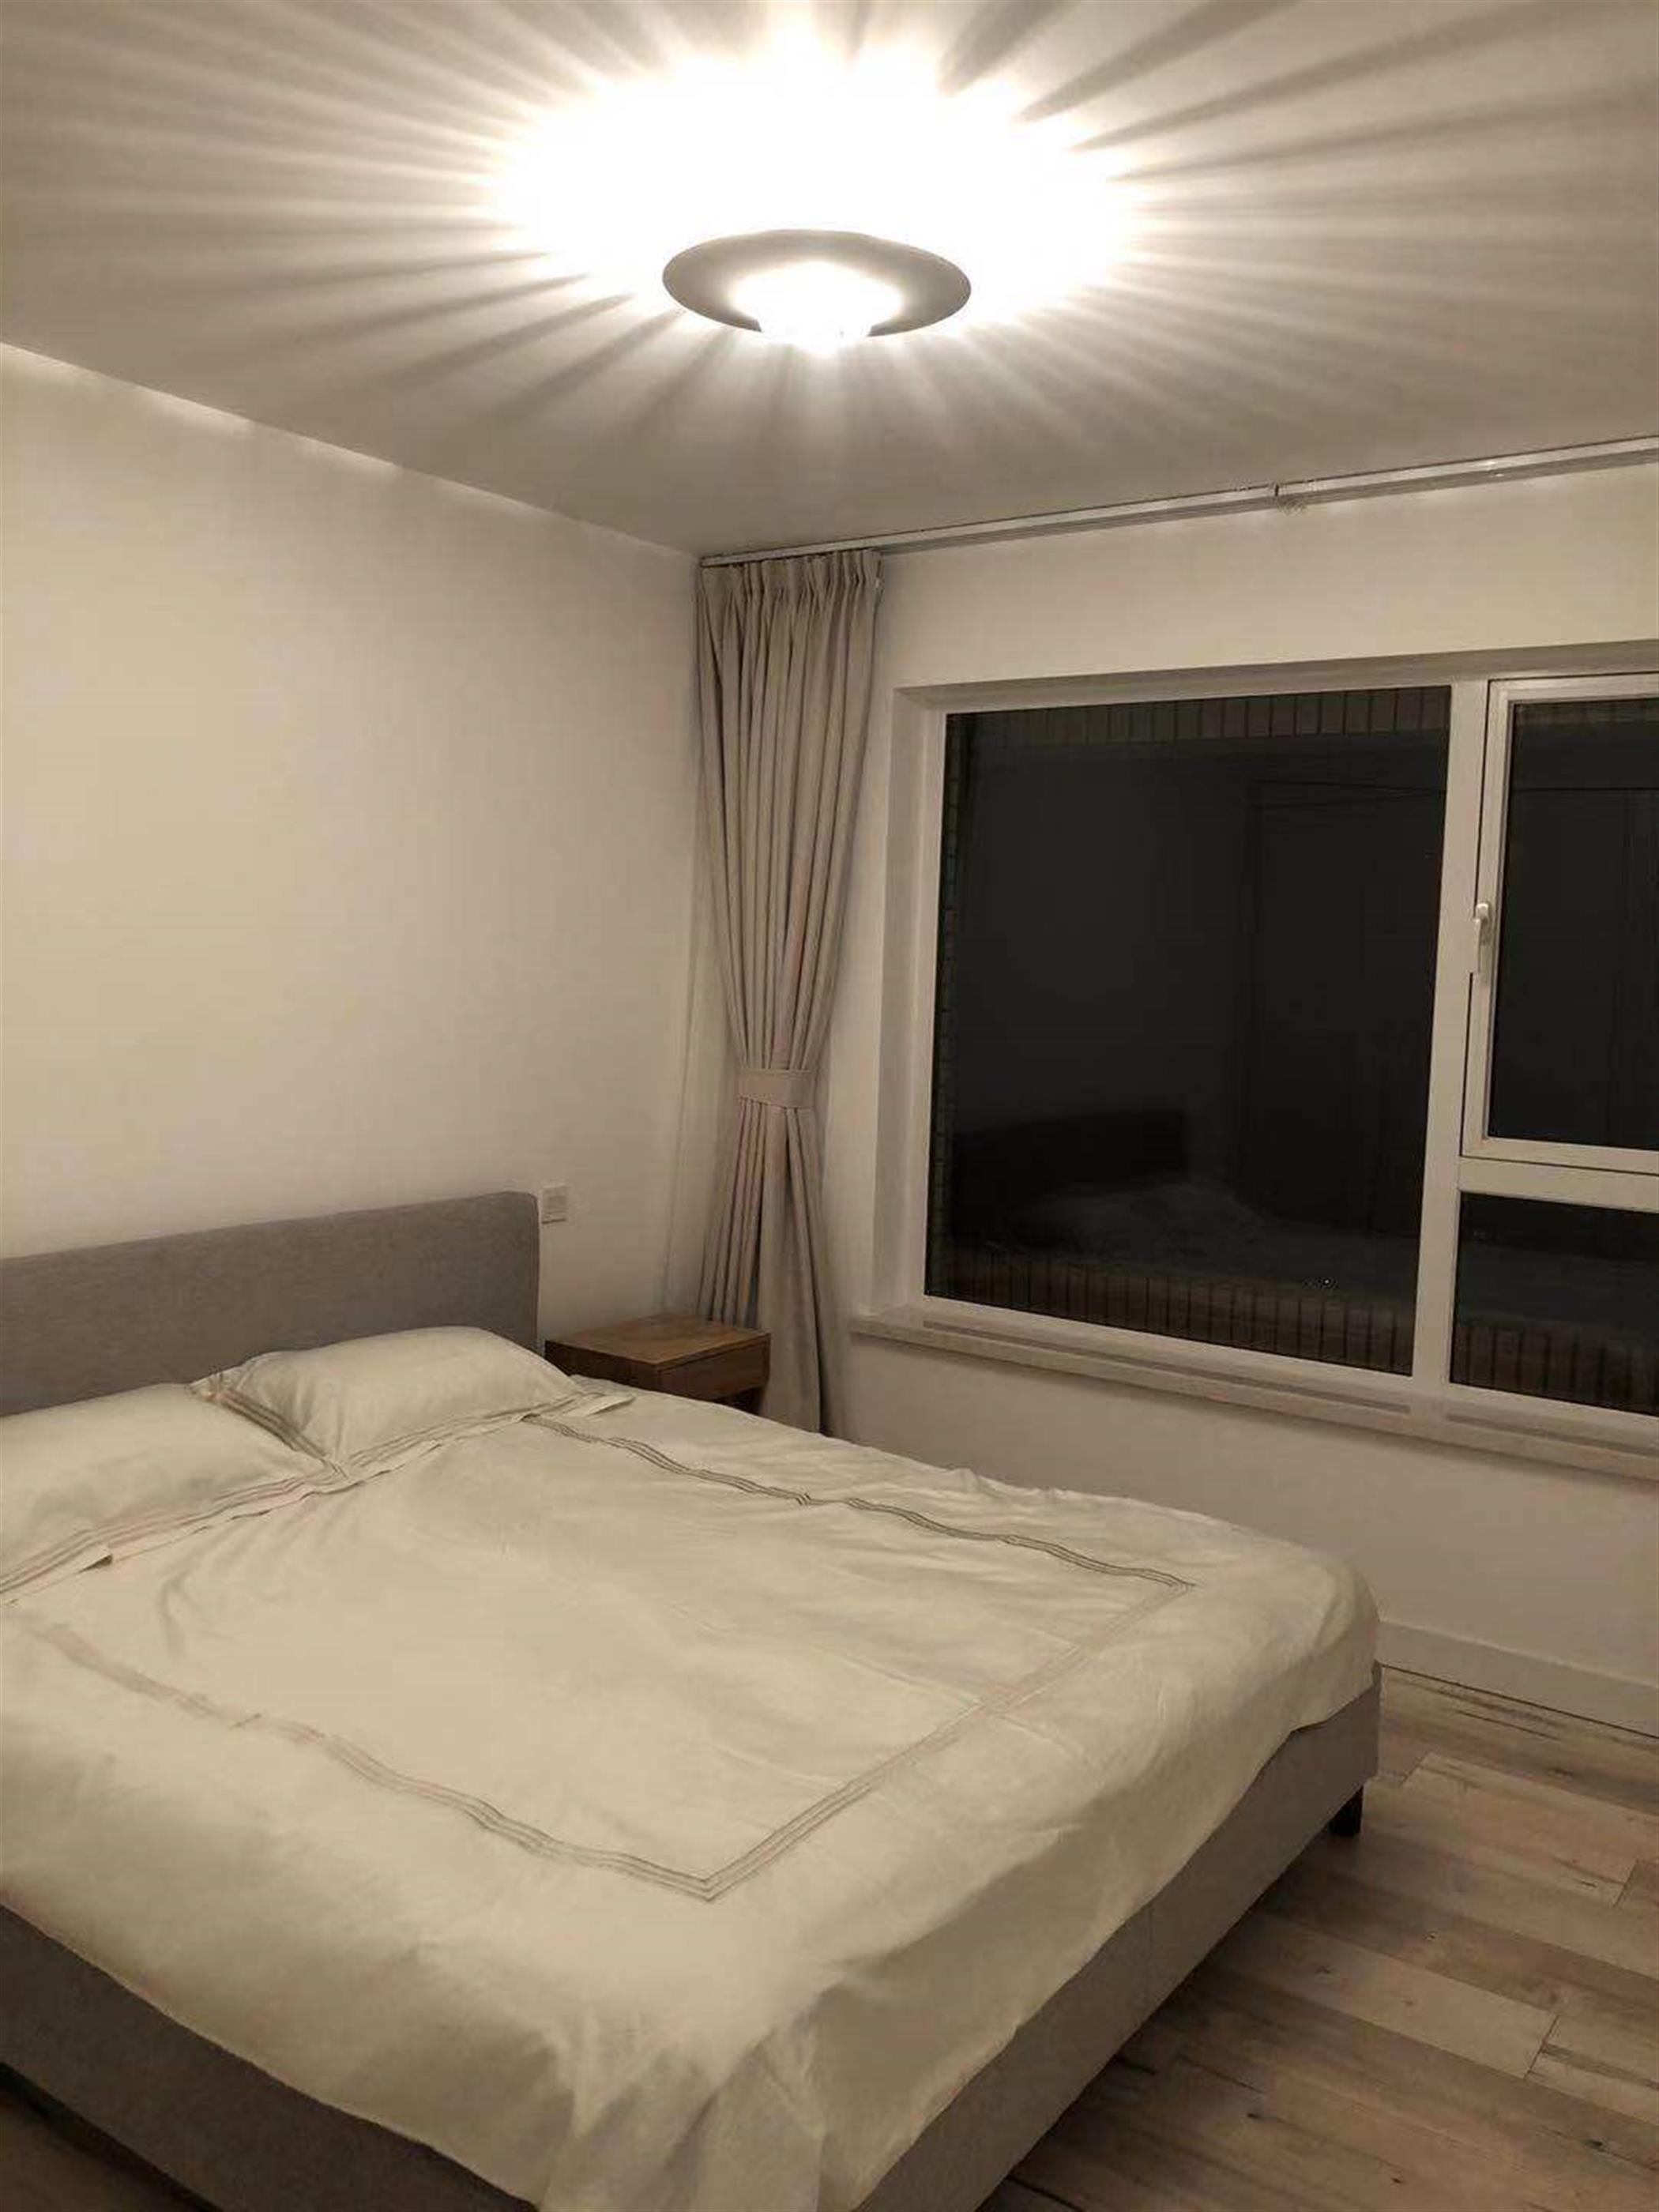 Big Bedroom Newly Decorated High-Quality 3BR Apt nr LN 2/11 in Shanghai’s Deluxe Courtyards Compound for Rent